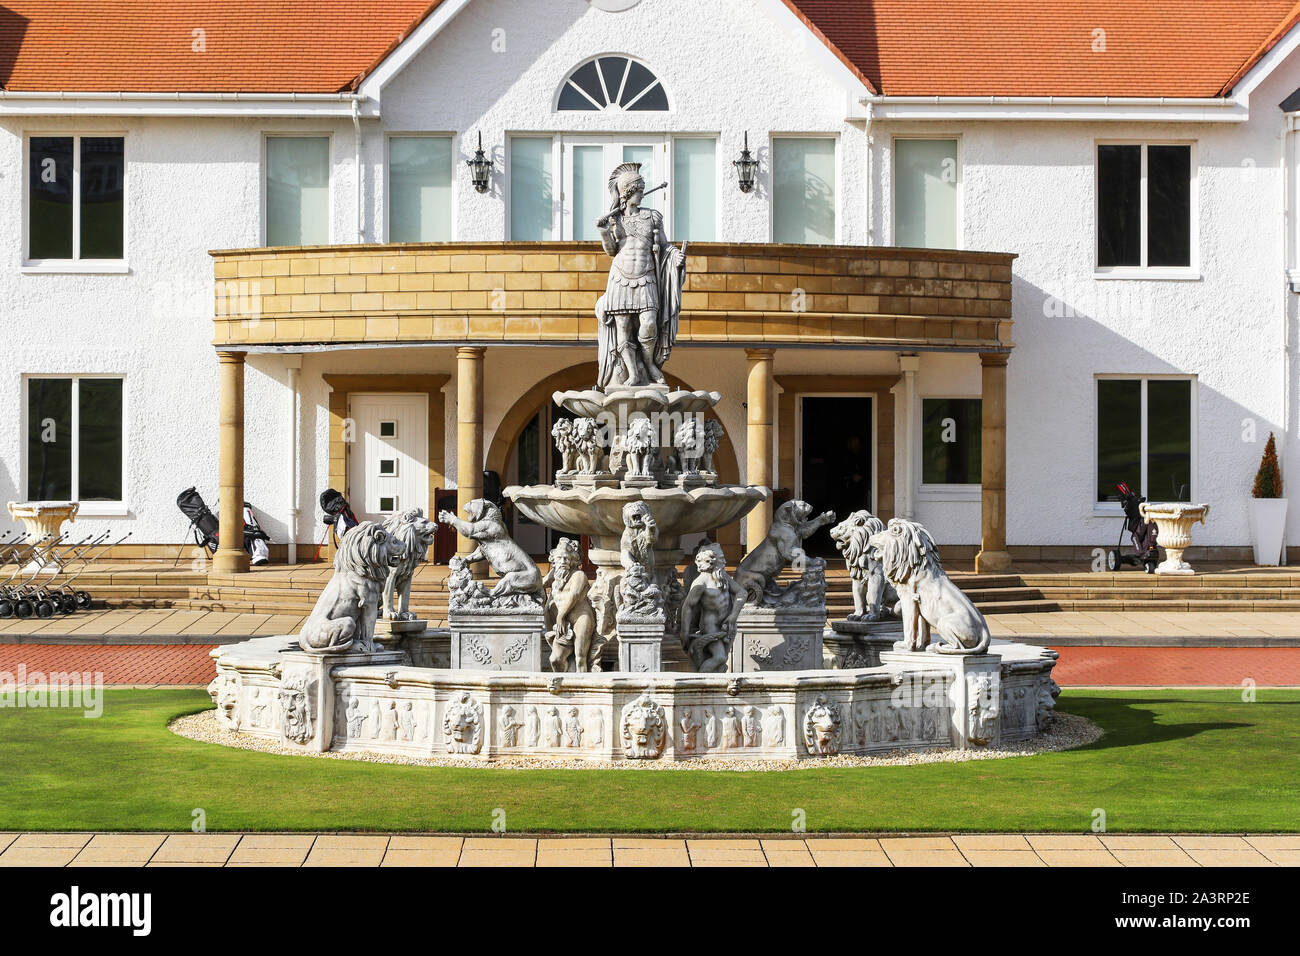 Ornate fountain at the front facade of the clubhouse of Trump Turnberry golf club, Turnberry, Ayrshire, Scotland, UK Stock Photo